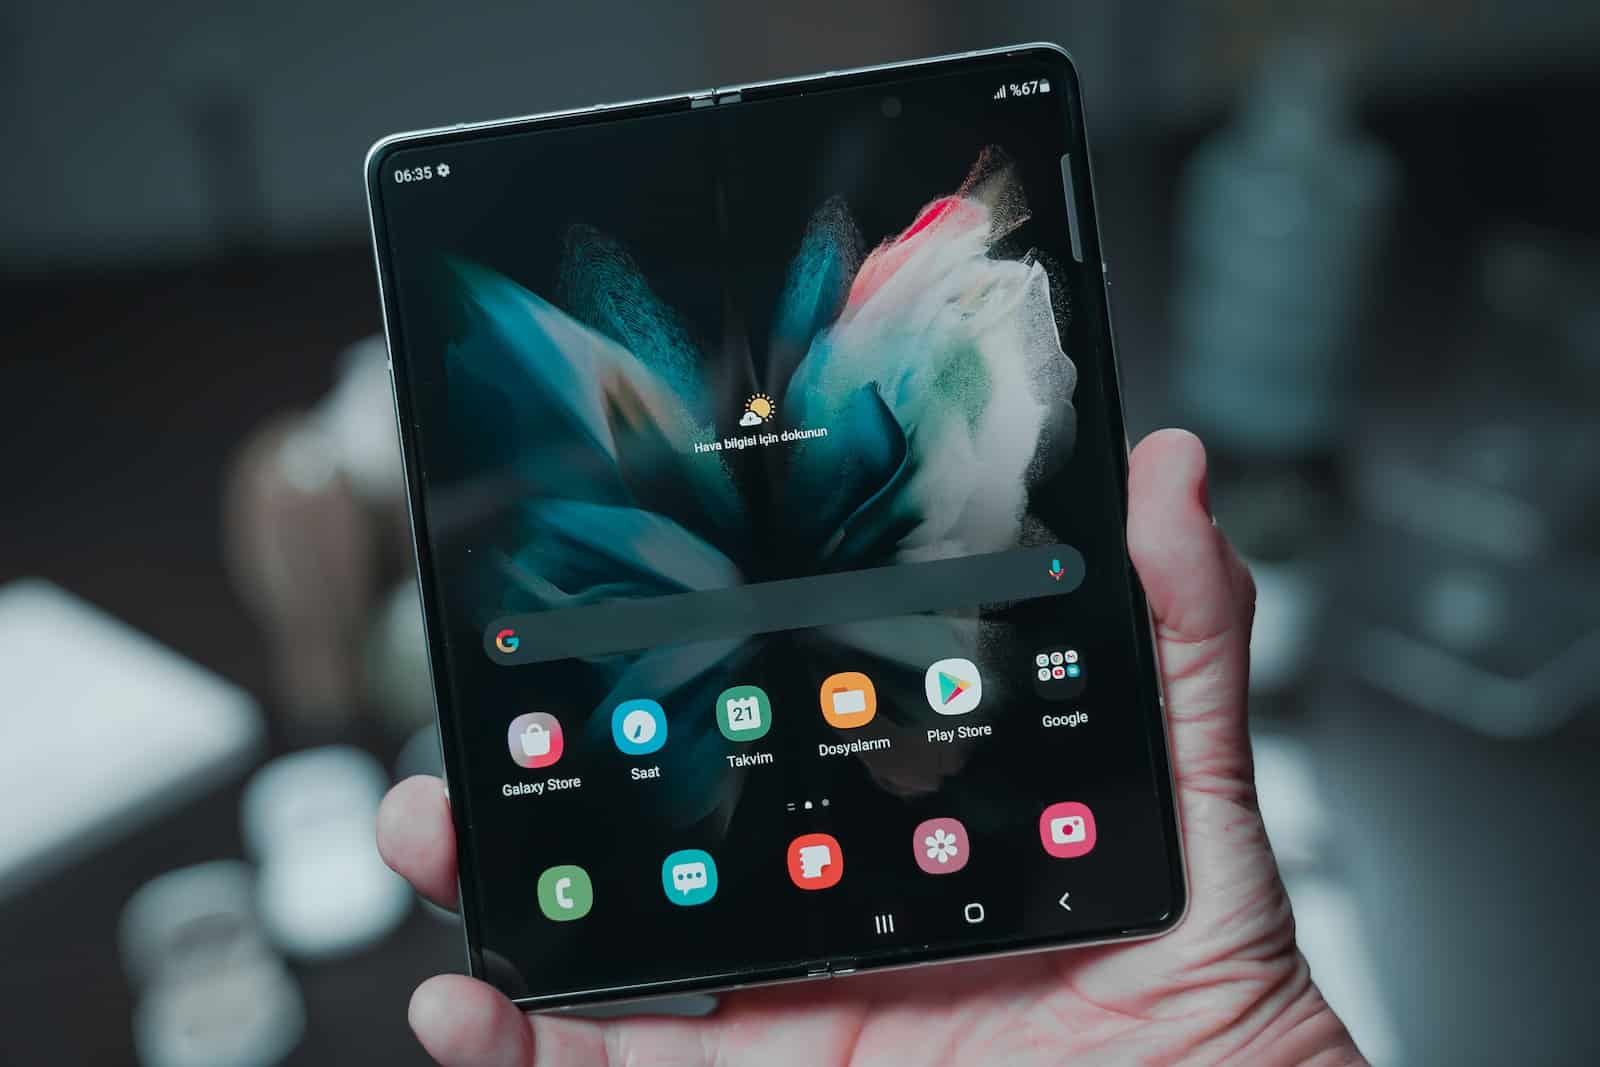 S pen pro doesn't hold battery at all : r/GalaxyFold